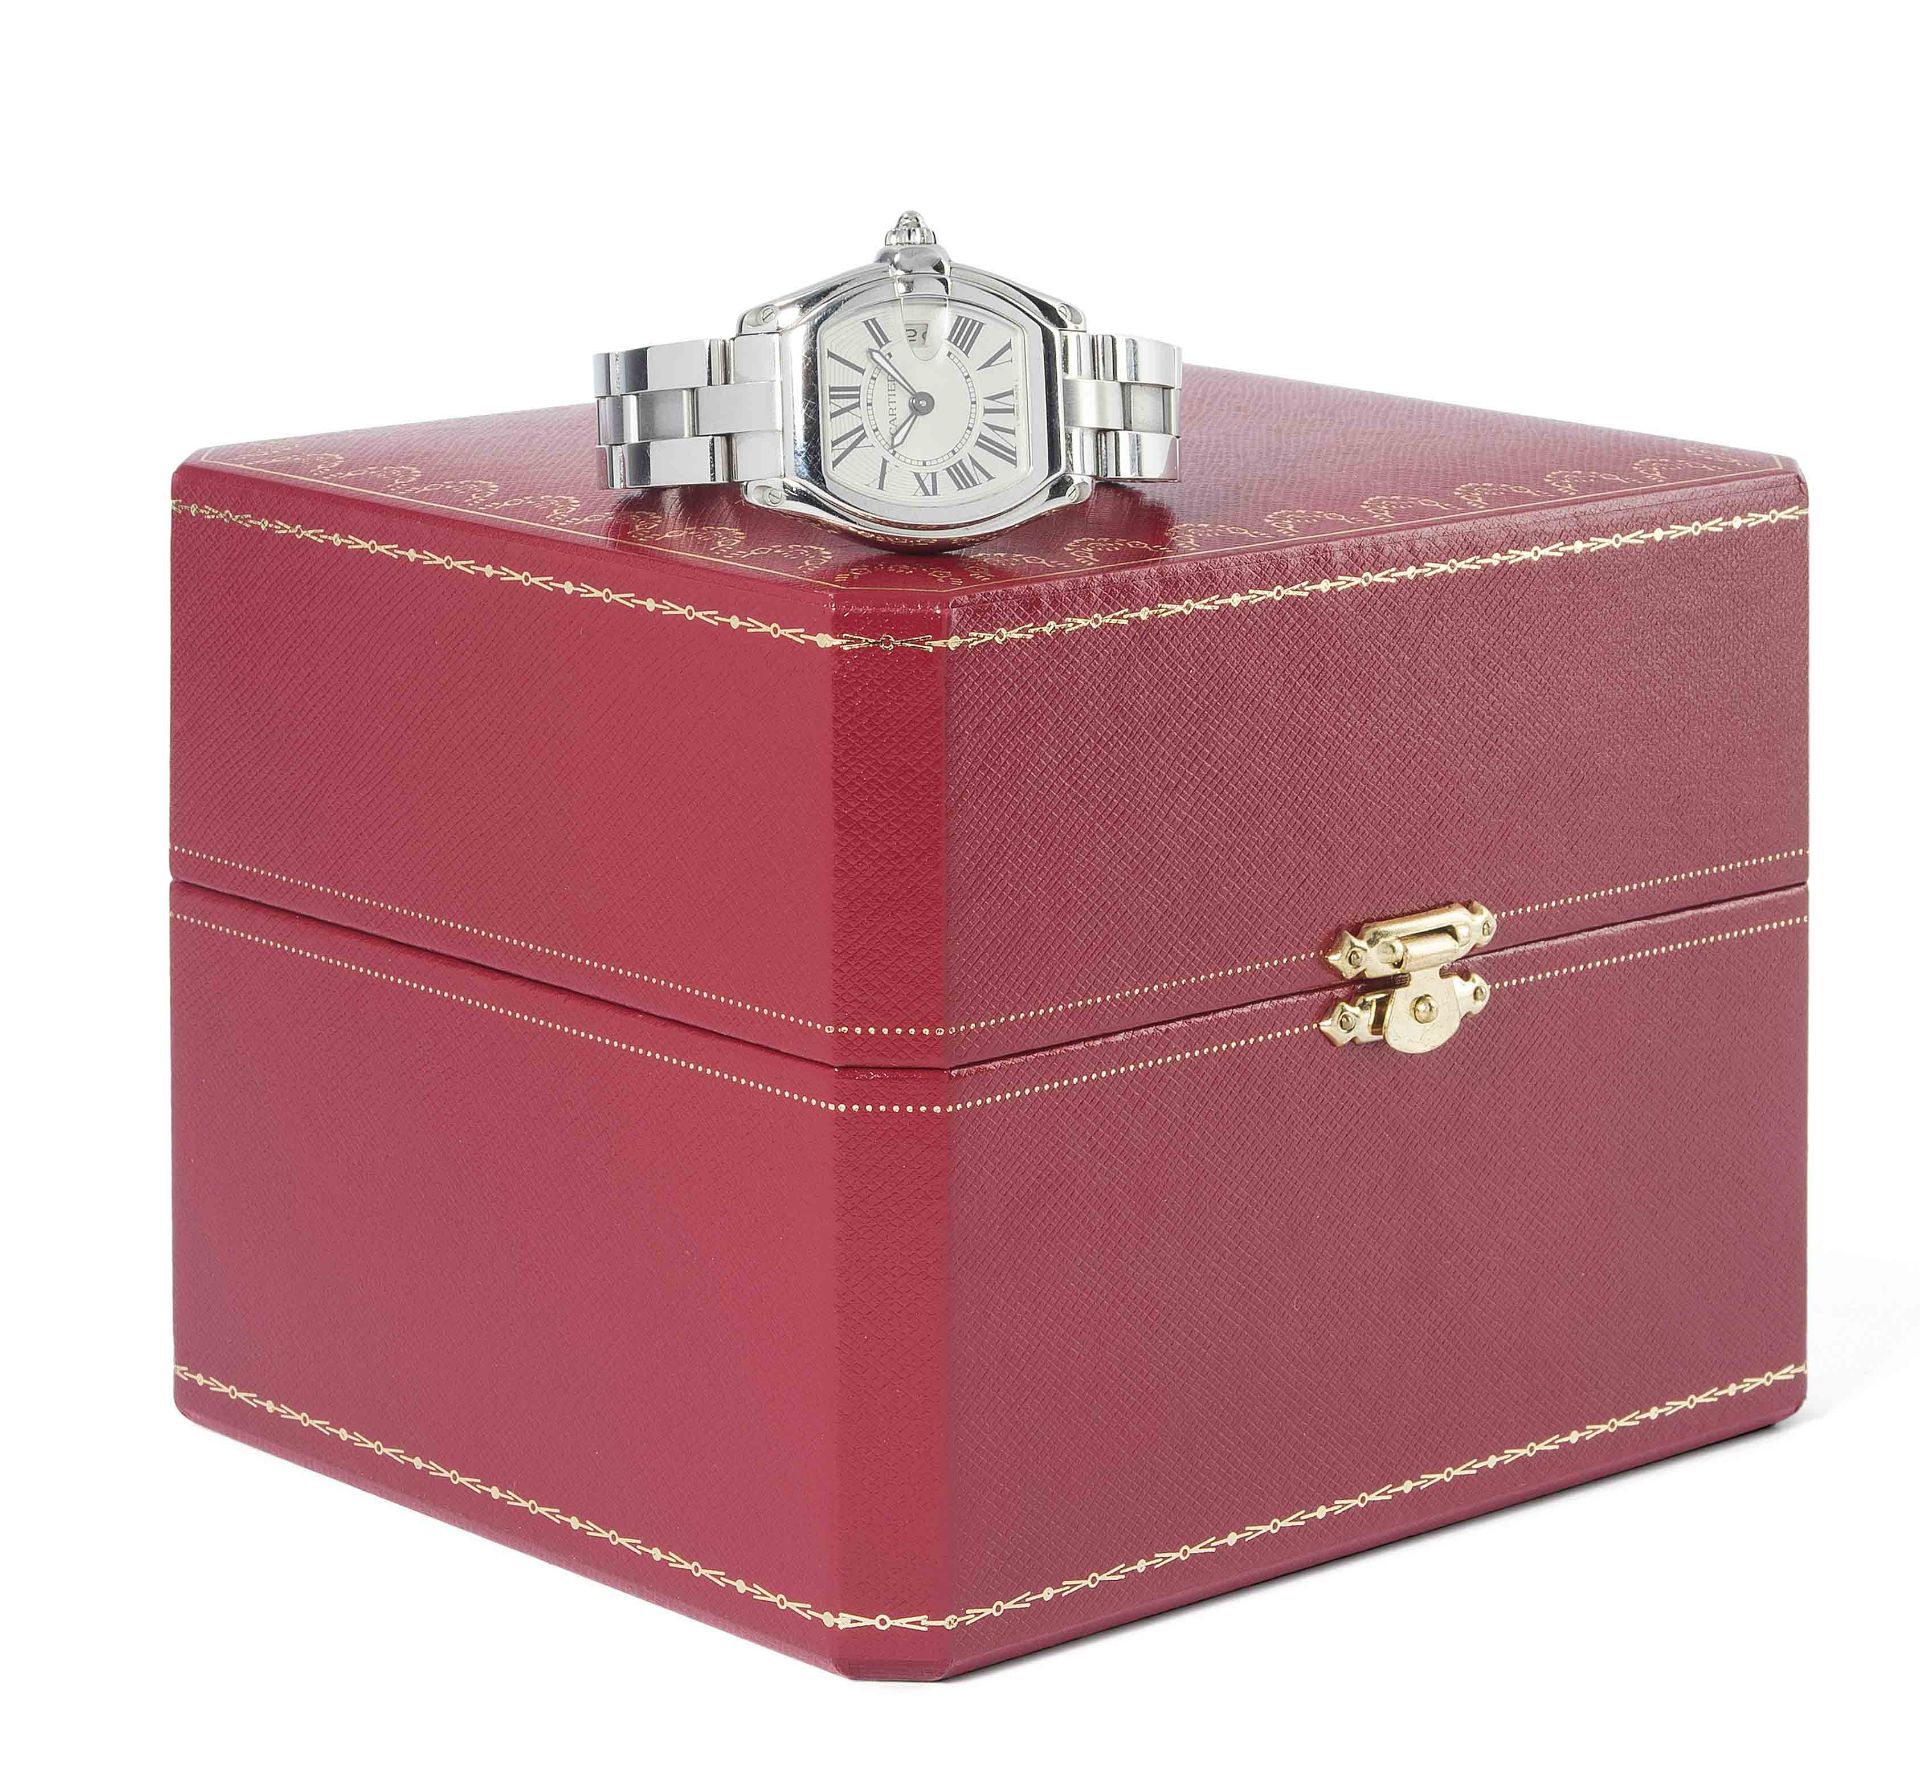 Cartier "Roadster", 2000 Jahre. - Image 2 of 4